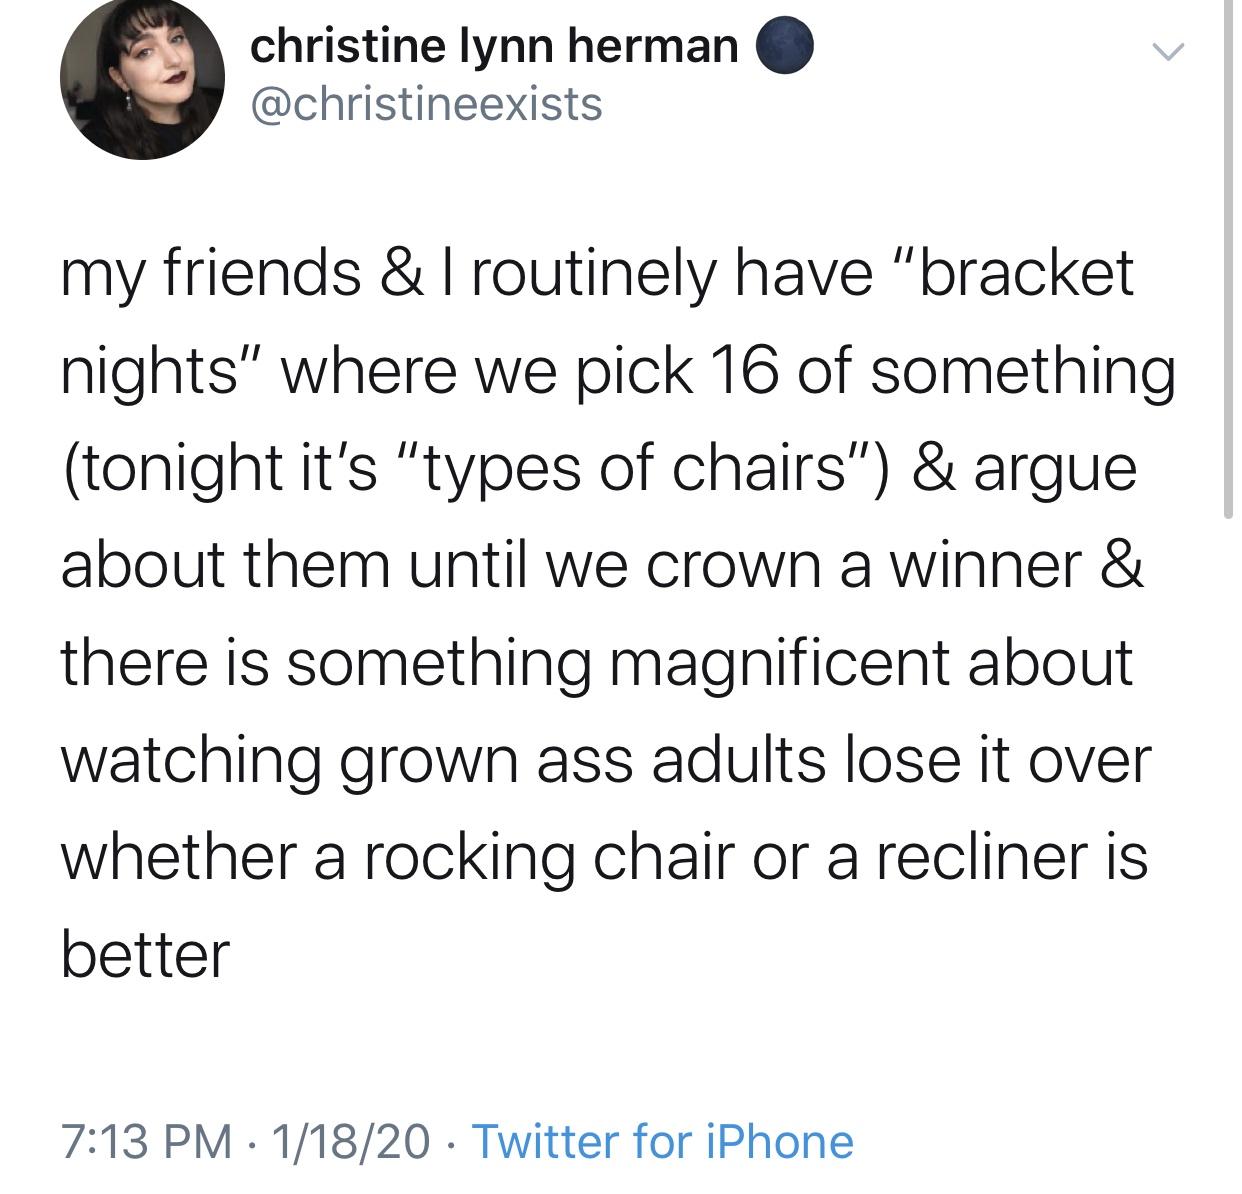 dave search tweets - christine lynn herman my friends & Troutinely have "bracket nights" where we pick 16 of something tonight it's "types of chairs" & argue about them until we crown a winner & there is something magnificent about watching grown ass adul